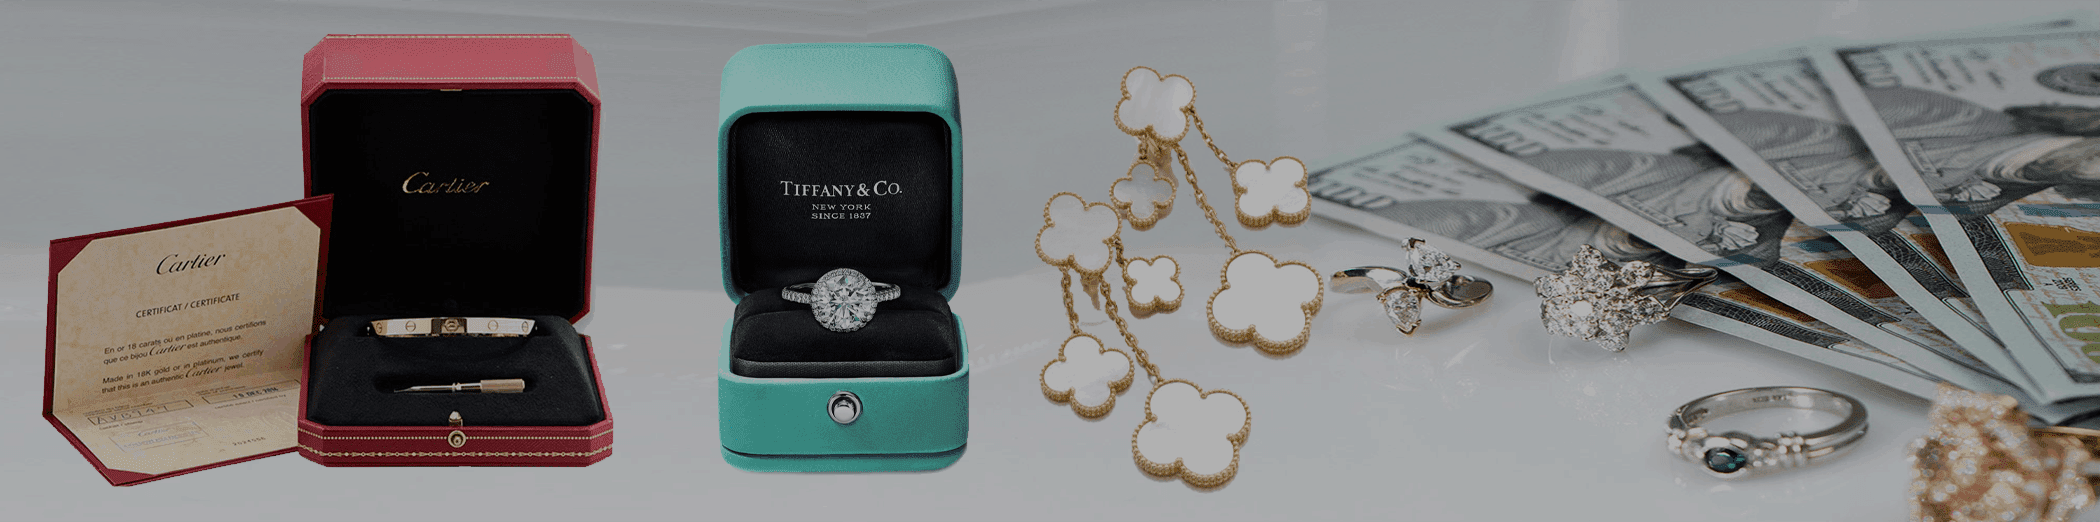 eBay Launches Authentication for Fine Jewelry